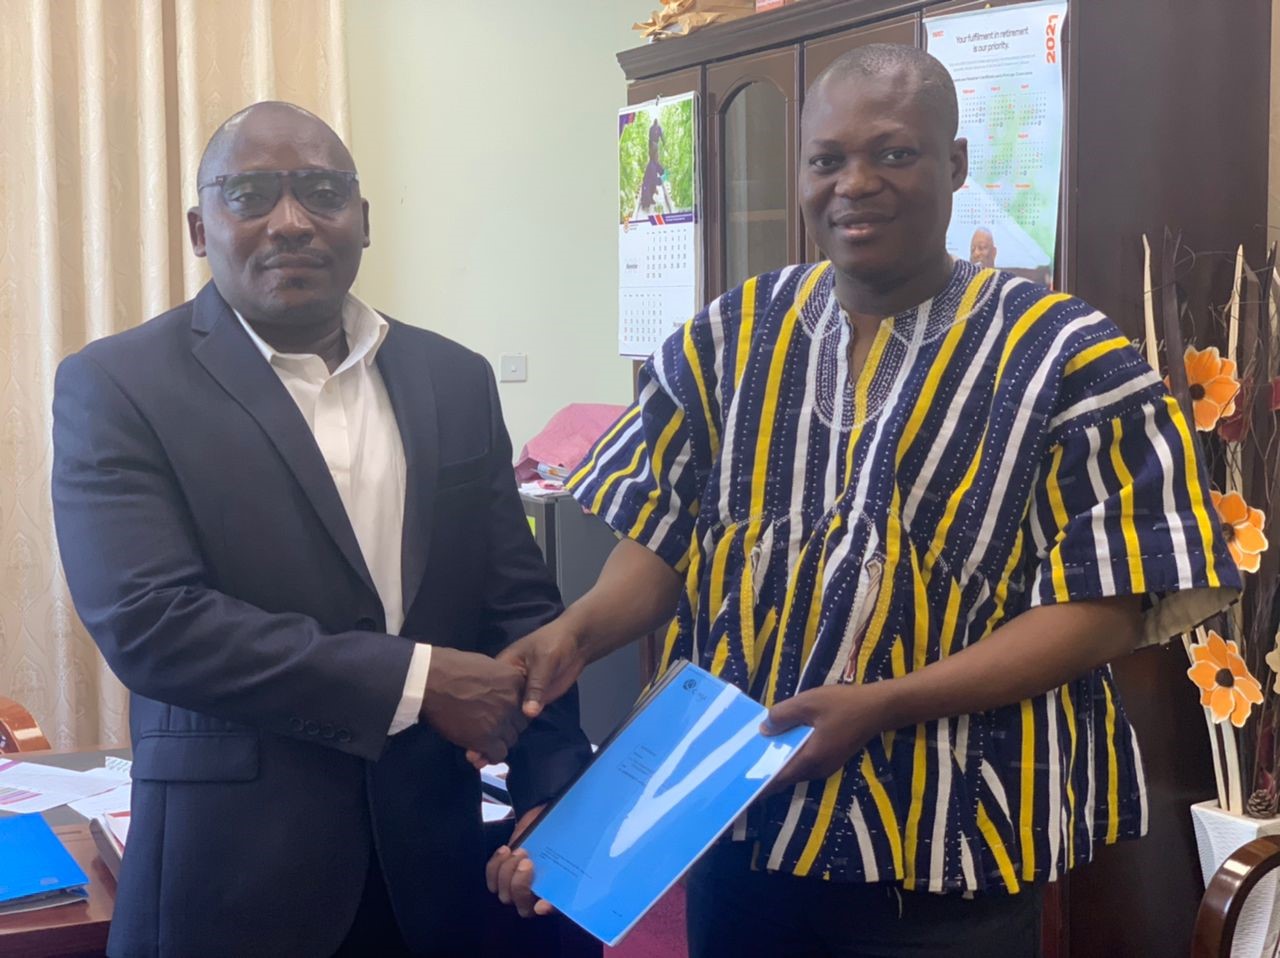 Mr. Paul Aninakwah (left) Country Director, CIMA Ghana with Prof John G. Gatsi, Dean, UCC School of Business after the signing.